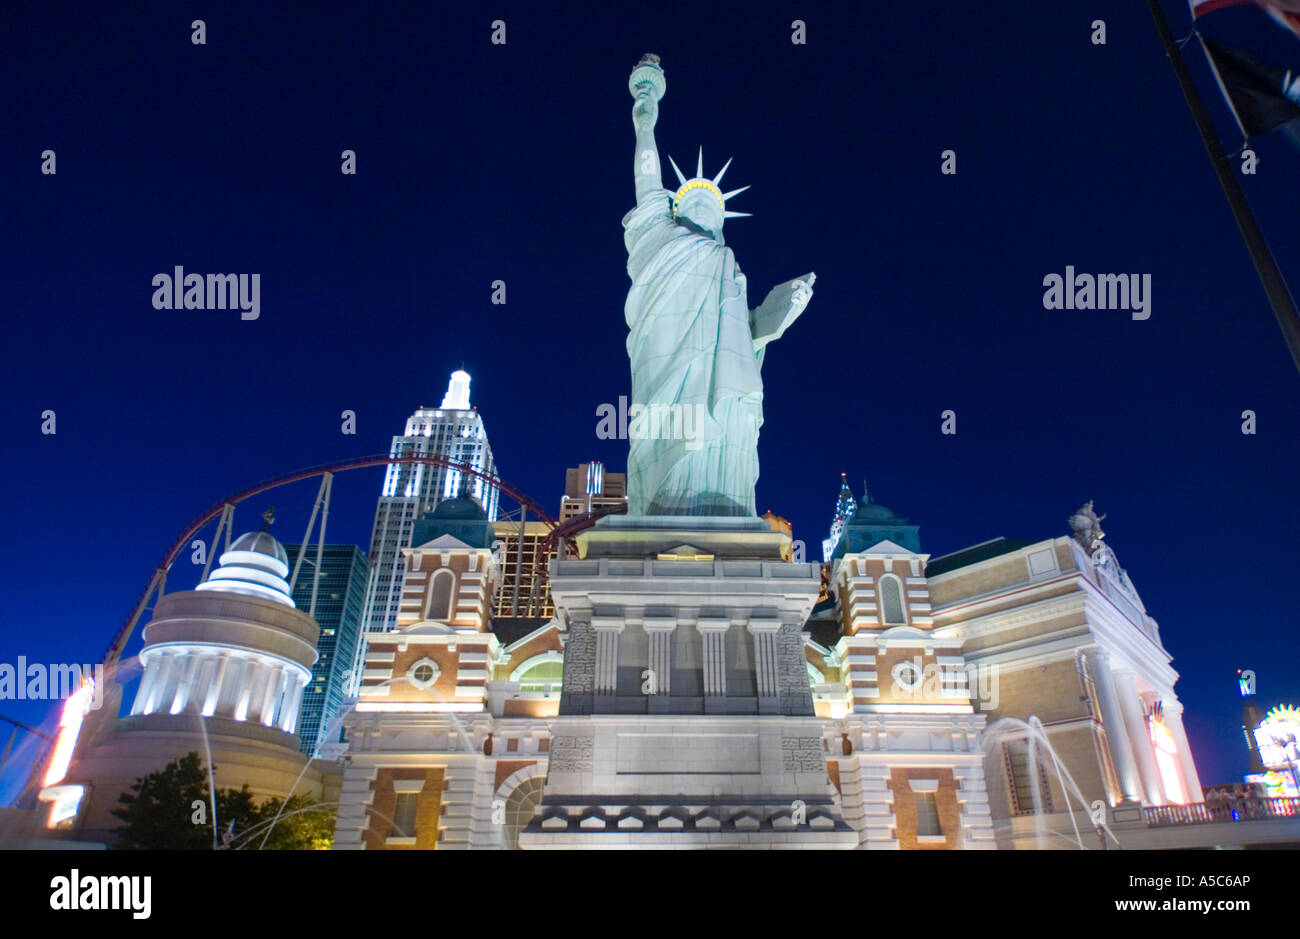 A nighttime exterior view of the New York, New York Resort and Casino in Las Vegas, Nevada, USA Stock Photo